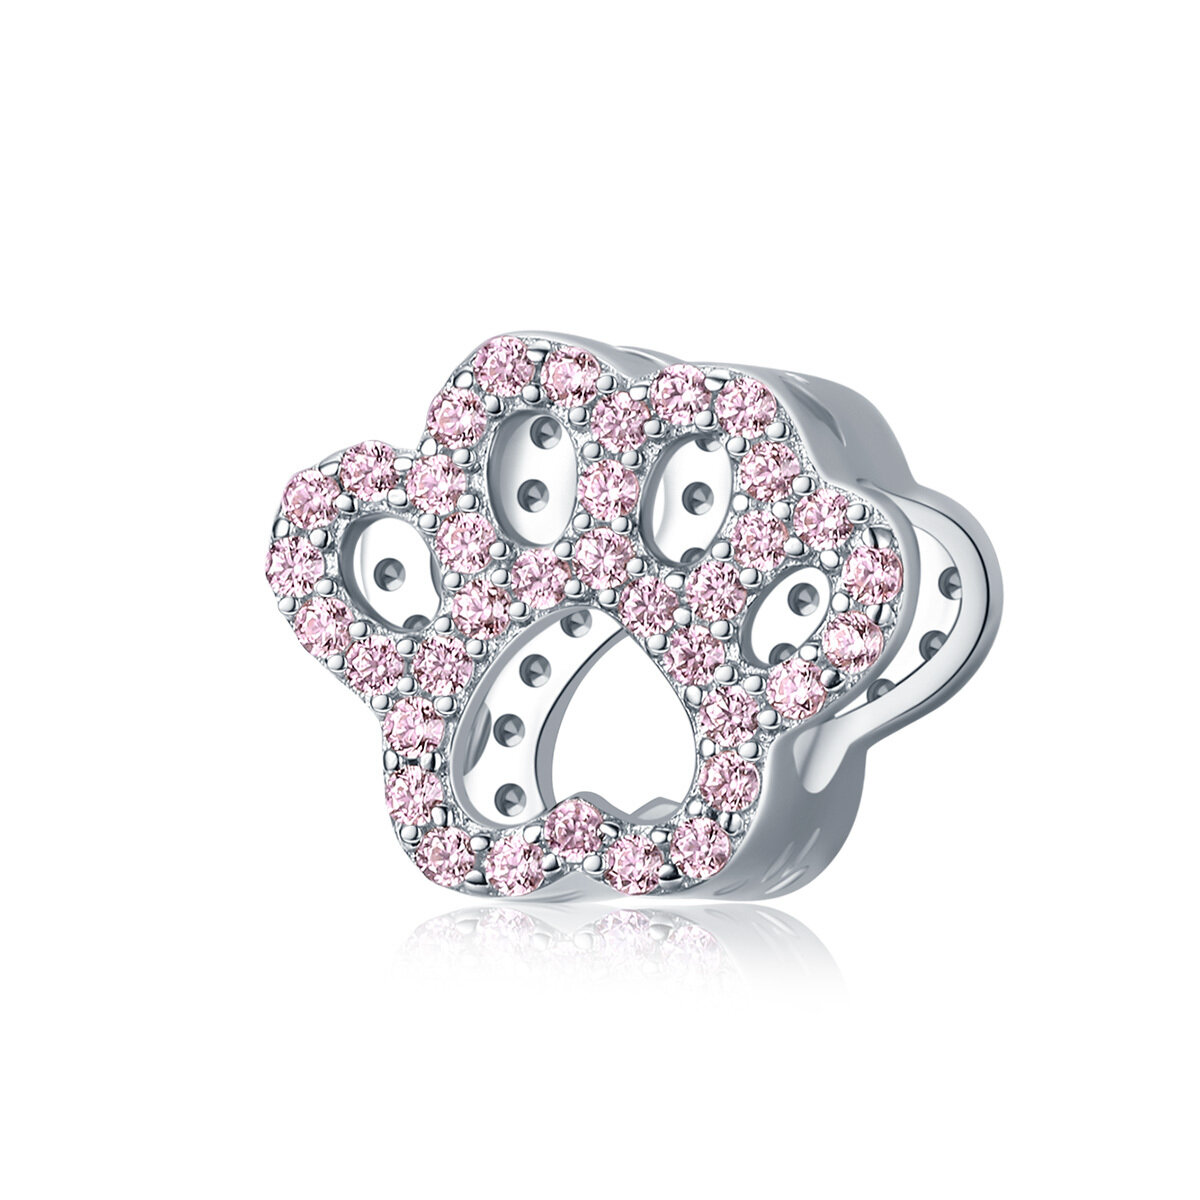 GemKing BSC164 Pink Paw S925 Sterling Silver Charm